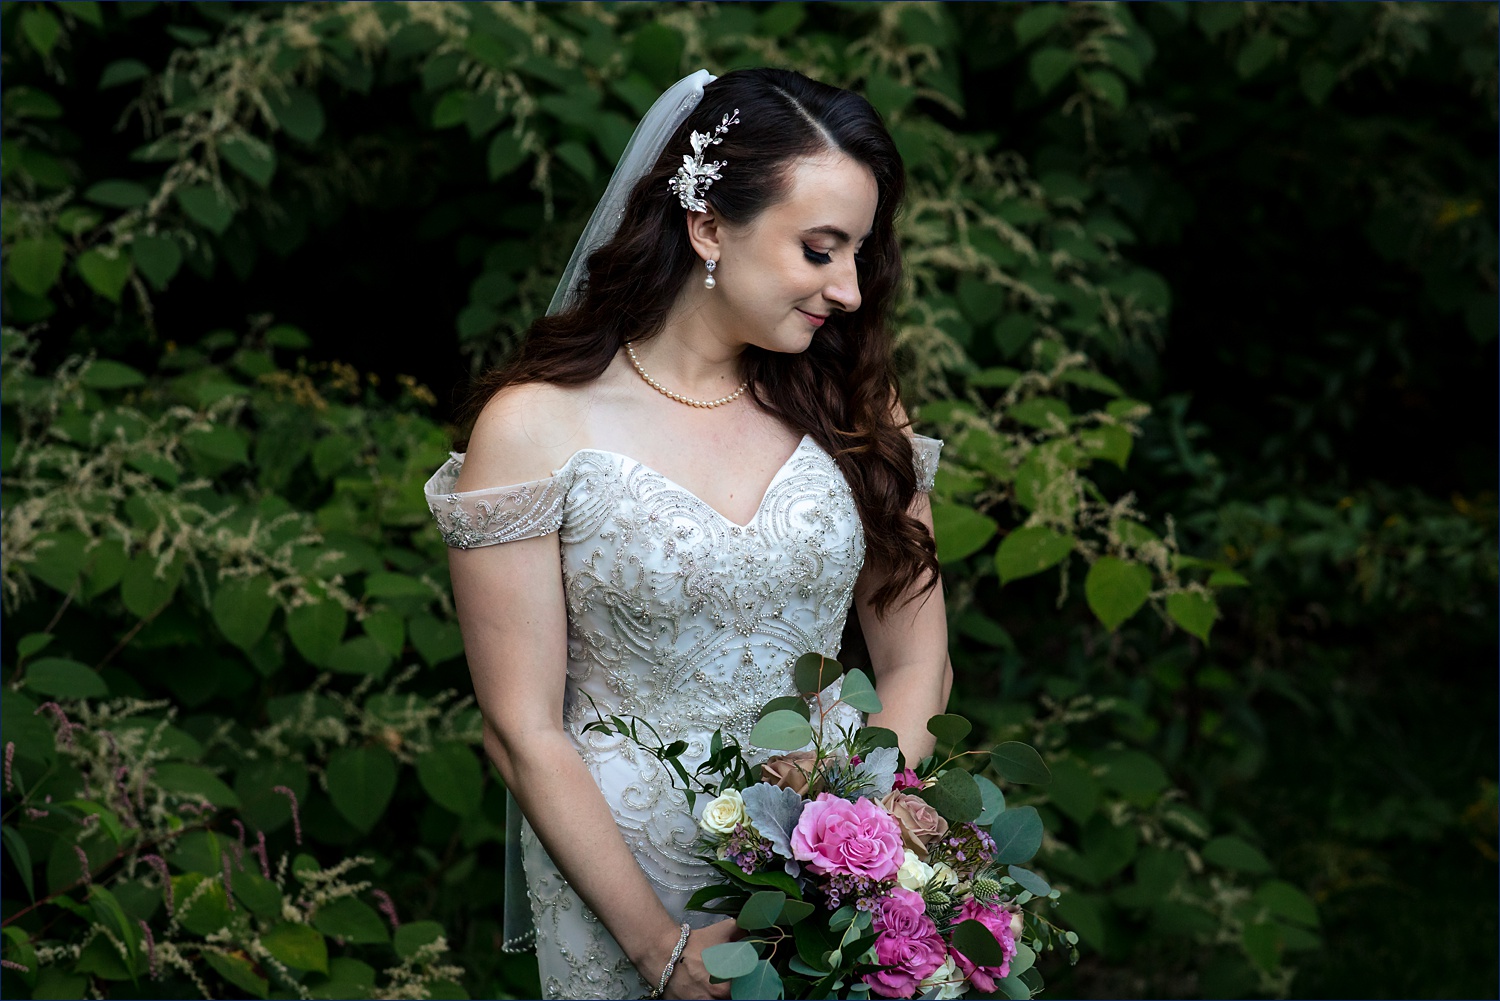 The bride in her classic modern wedding gown and styling in NH